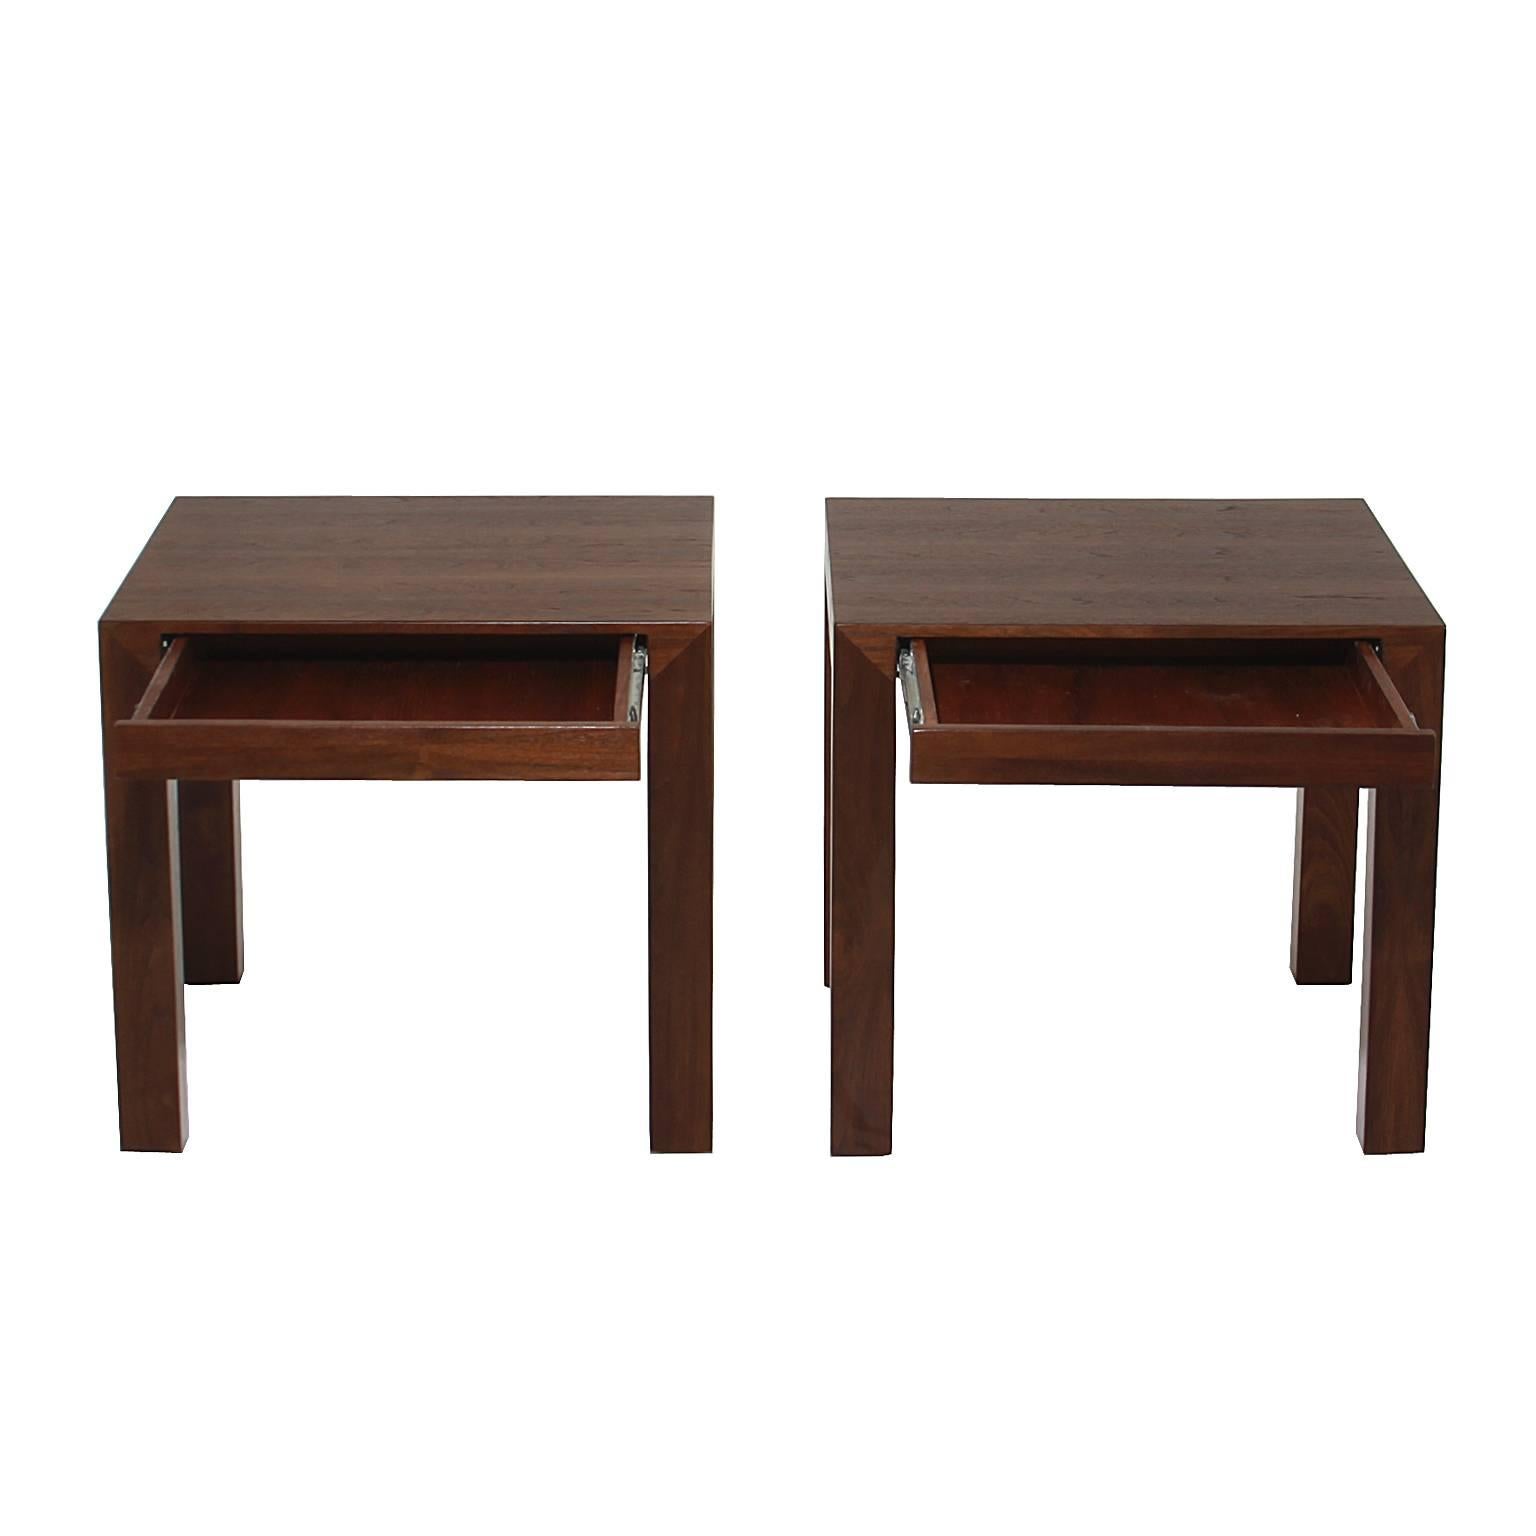 American Pair of Minimal Walnut Side Tables with Drawers